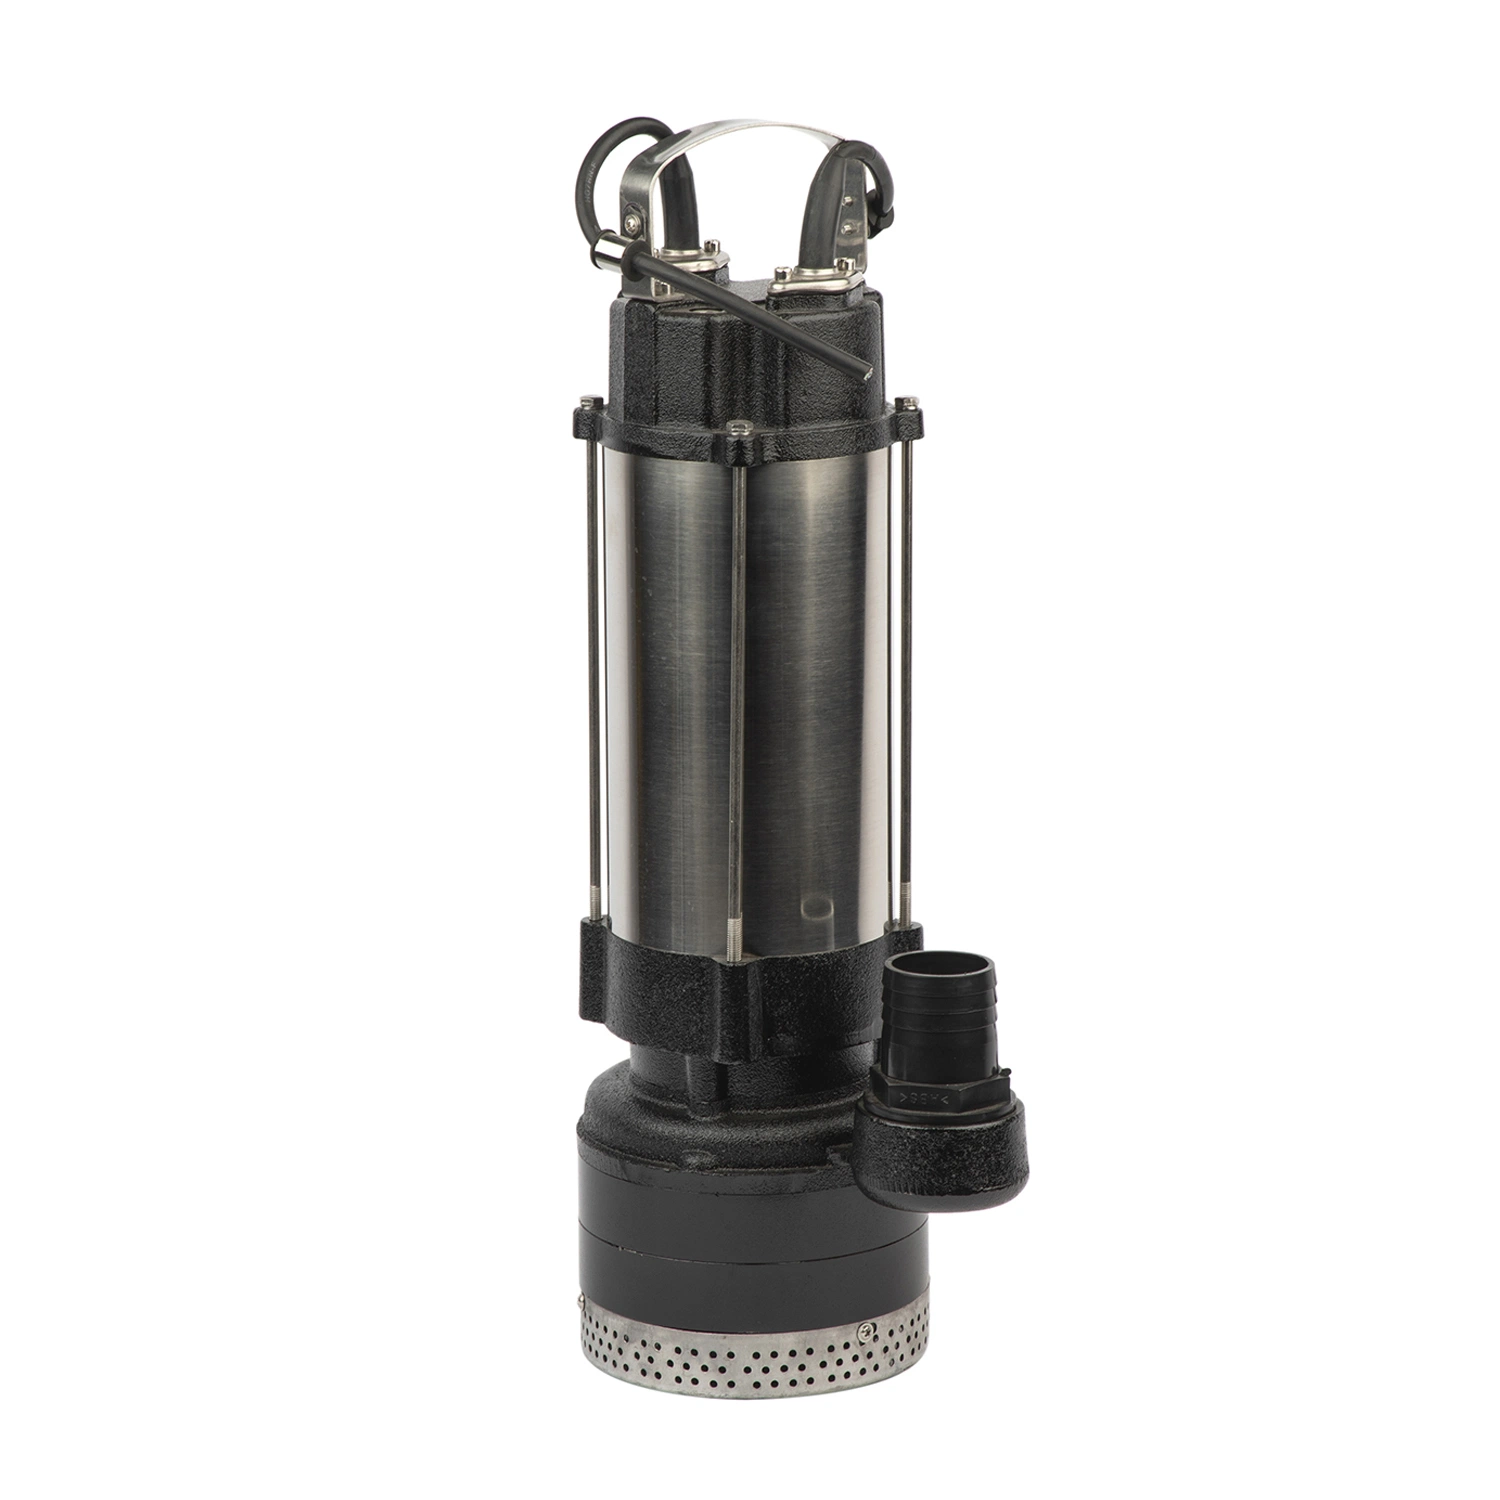 Submersible Pump 2HP for Dirty Water Sewage Pump